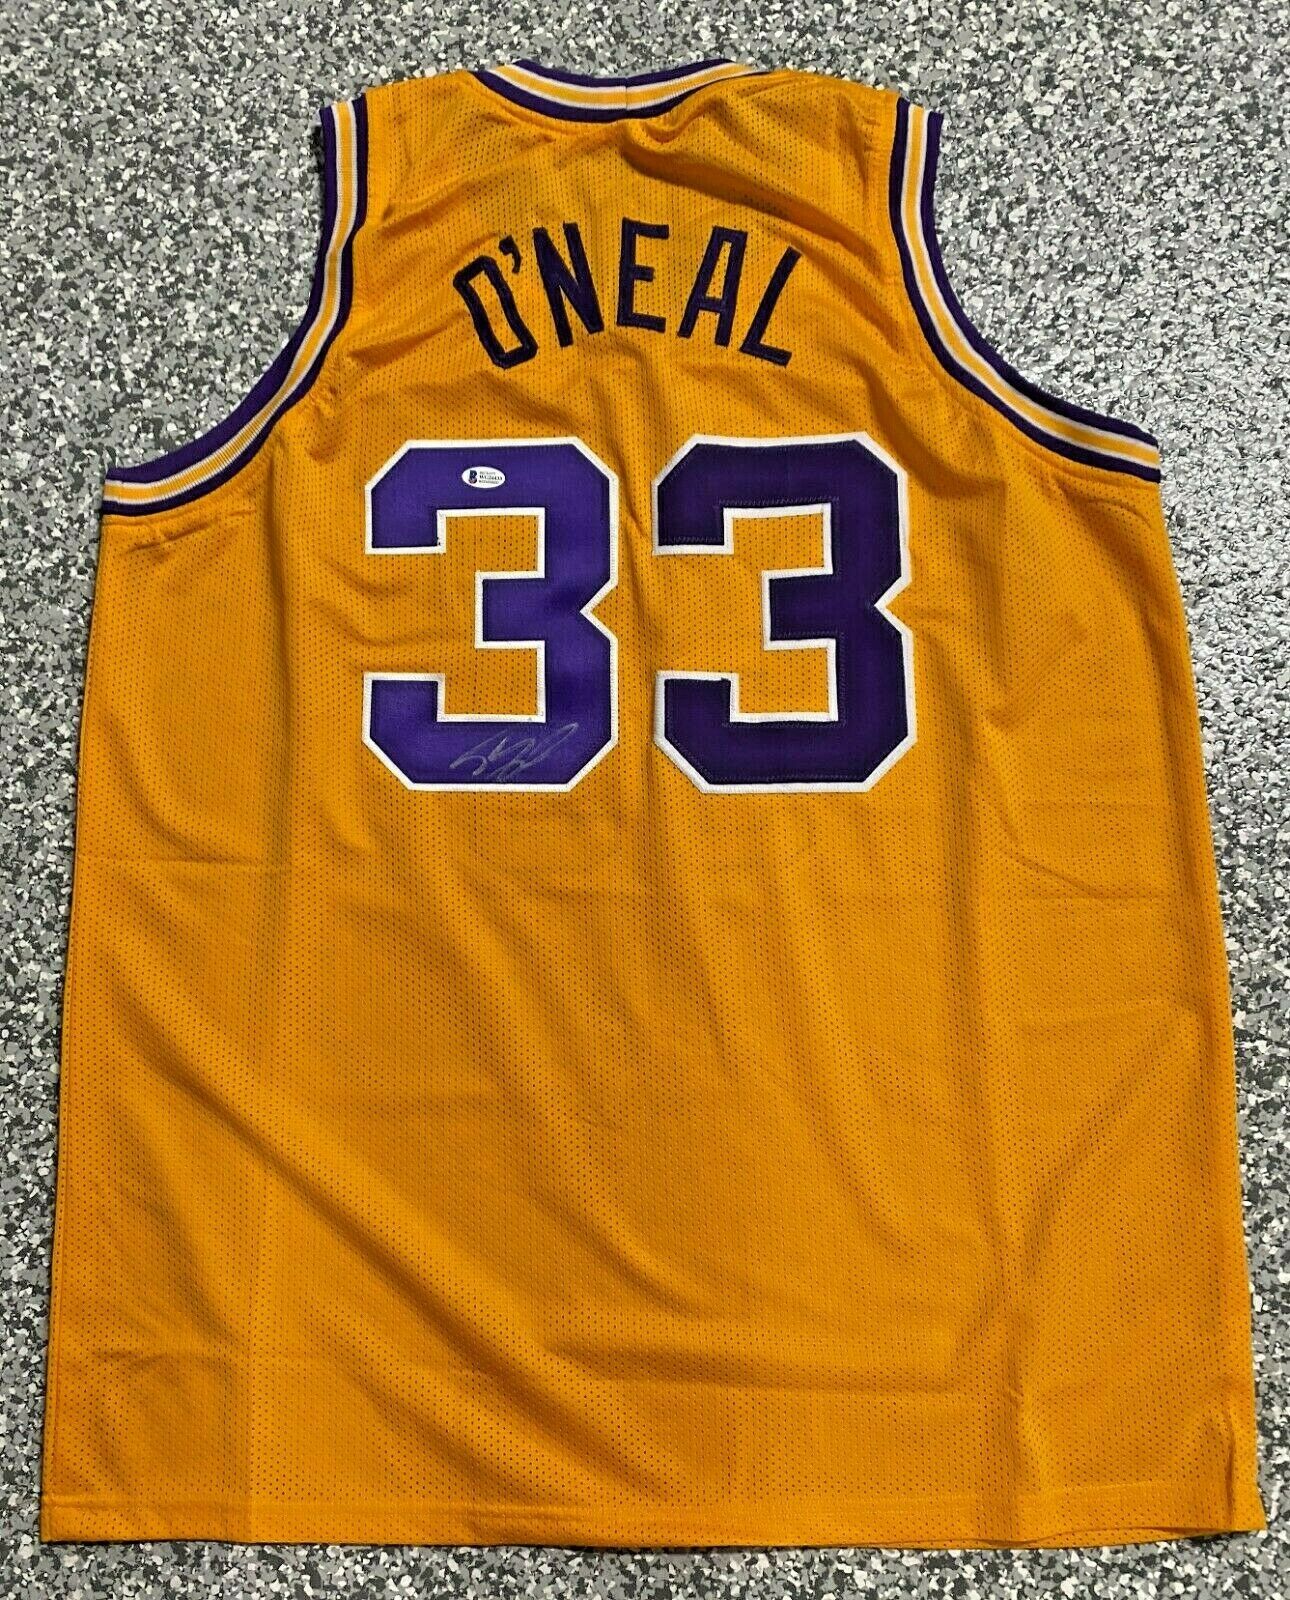 Shaquille Shaq O'neal Signed Yellow Jersey Auto Beckett Bas Witnessed Coa